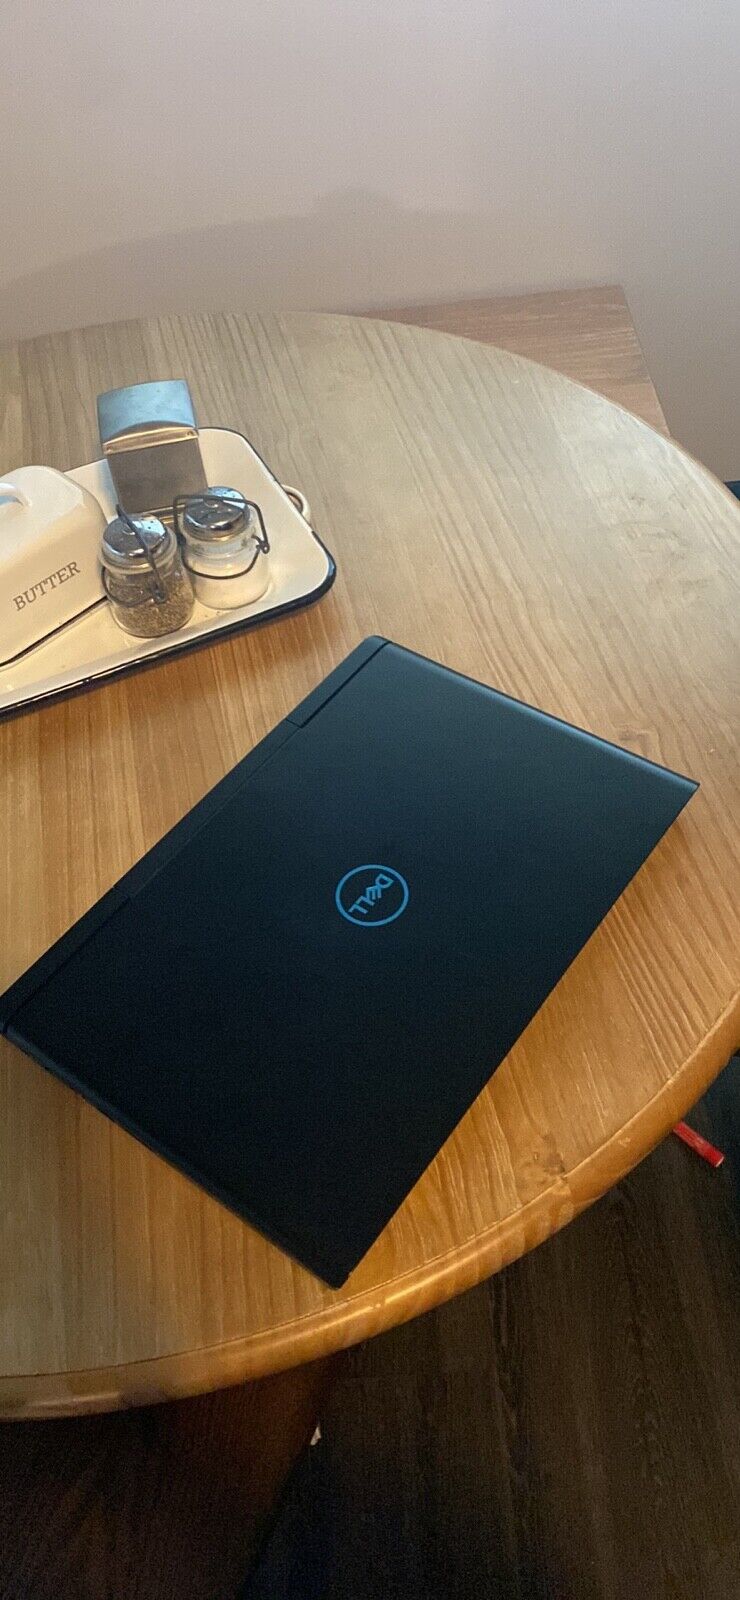 dell g7 15 gaming laptop